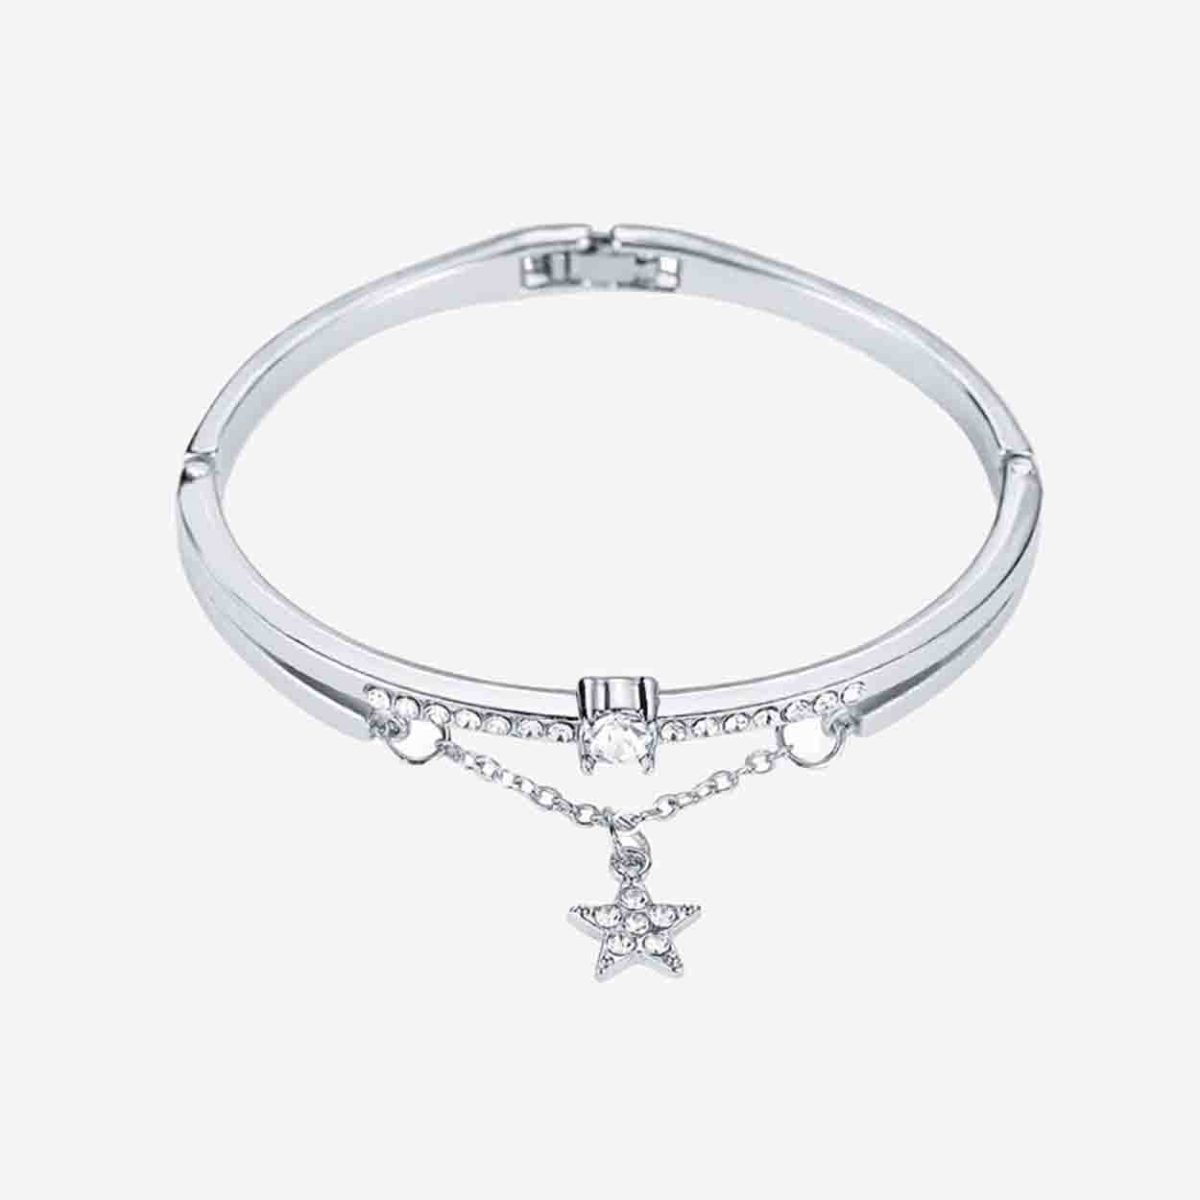 A silver bracelet with a star-shaped crystal